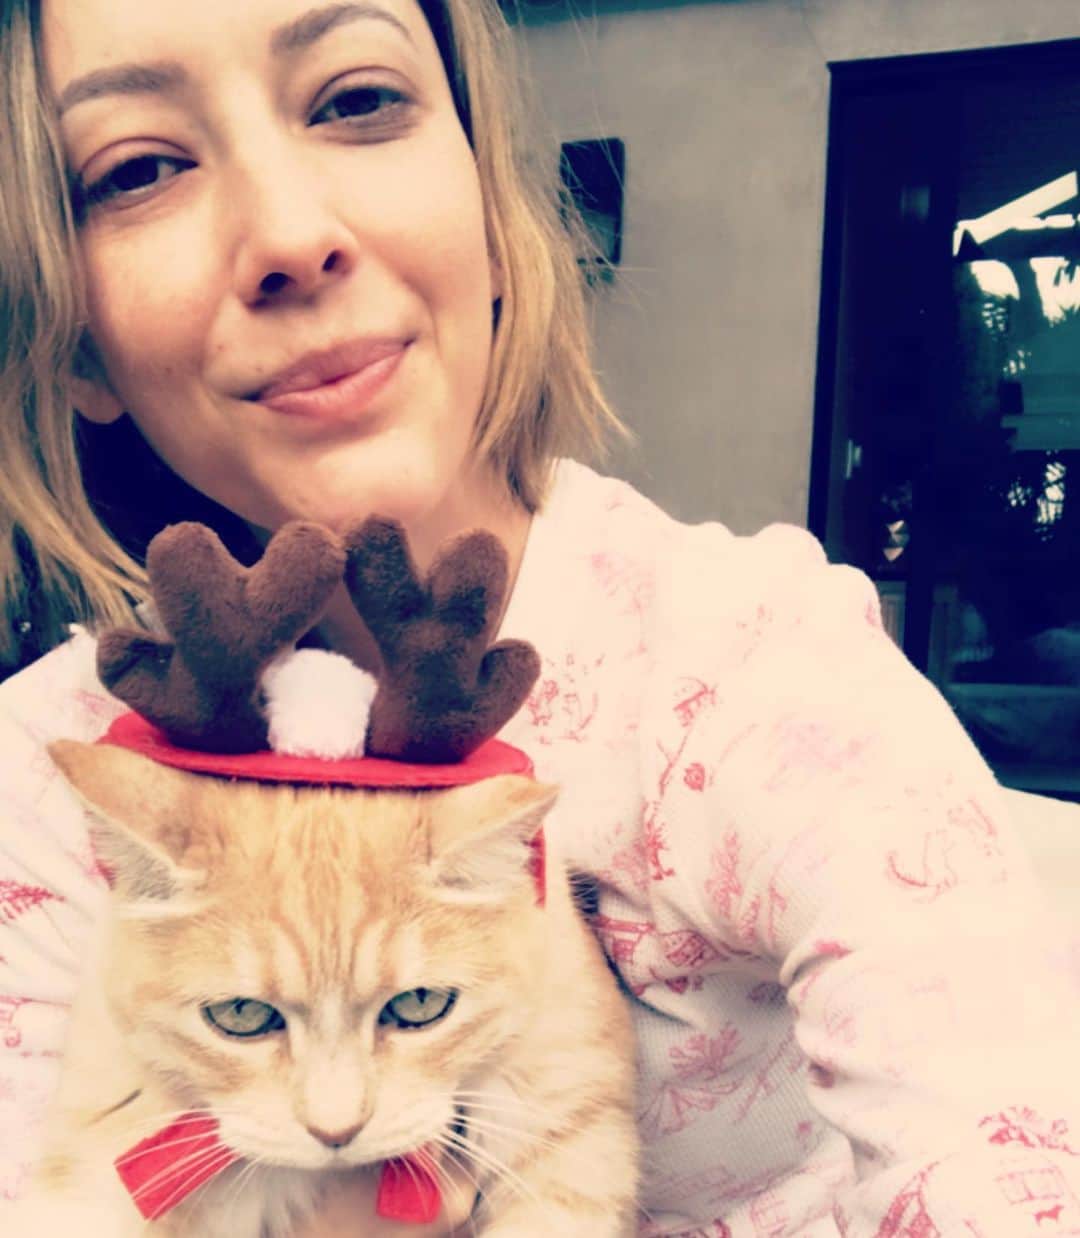 タリン・サザンさんのインスタグラム写真 - (タリン・サザンInstagram)「Christmas morning 2019 I woke up puffy and bleary-eyed, having just received some unexpected & upsetting news the night before.   To distract myself from myself, I tried putting Tiggie in a festive costume (1st photo), but it did little to lift my spirits. I tried to meditate, but my mind only had space for tears. I still had another month of daily radiation at the hospital, so there was no escaping LA either. And my tiny 1 ft. pine tree, which I had purchased in a fit of giggles for my new home, suddenly looked like the saddest sight ever seen.   I looked in the mirror at the large pale bald spots from chemo. Who would want this, I thought. For the first time, I felt unable to soothe a growing sense of loneliness and despair. I wondered…how did I get here? And more importantly, how do I claw my way out?  One year later - and I am in Bali (2nd photo.) Here there are no reminders of the holidays. No cat costumes or tiny pine trees to lure me back into a dance with darkness. Just the thick heat of jungle air, an even thicker head of hair, and sweet chunks of papaya with friends old and new.   Healing the physical and emotional wounds of this past year has been a slow and deceptive process. Just when I feel I’m finally out of the weeds, I stumble upon a new pang. But I’m pretty sure that’s how this whole ‘being human’ and healing thing works.   When things are profoundly hard, that’s just it, there’s no shortcut through or around it….just connection, warmth, and touch to soften the edges. The process is a bit like peeling a stupid magic onion that keeps growing as you peel. The onion never quite disappears (f’n onion!!), but the trick is to just keep peeling. Eventually, the stupid onion gets smaller, and the sting of associated tears lessens as well.  For those navigating the harder edges of life right now, give yourself grace in doing whatever it is you need to keep moving. Whether that’s leaning into the grief, finding distraction, loving it into submission, or a million and one other strategies in between, there is no wrong path. You’re chipping away at a very stubborn stupid onion. Eventually, the sting will simmer and subside.  T」12月30日 14時15分 - tarynsouthern